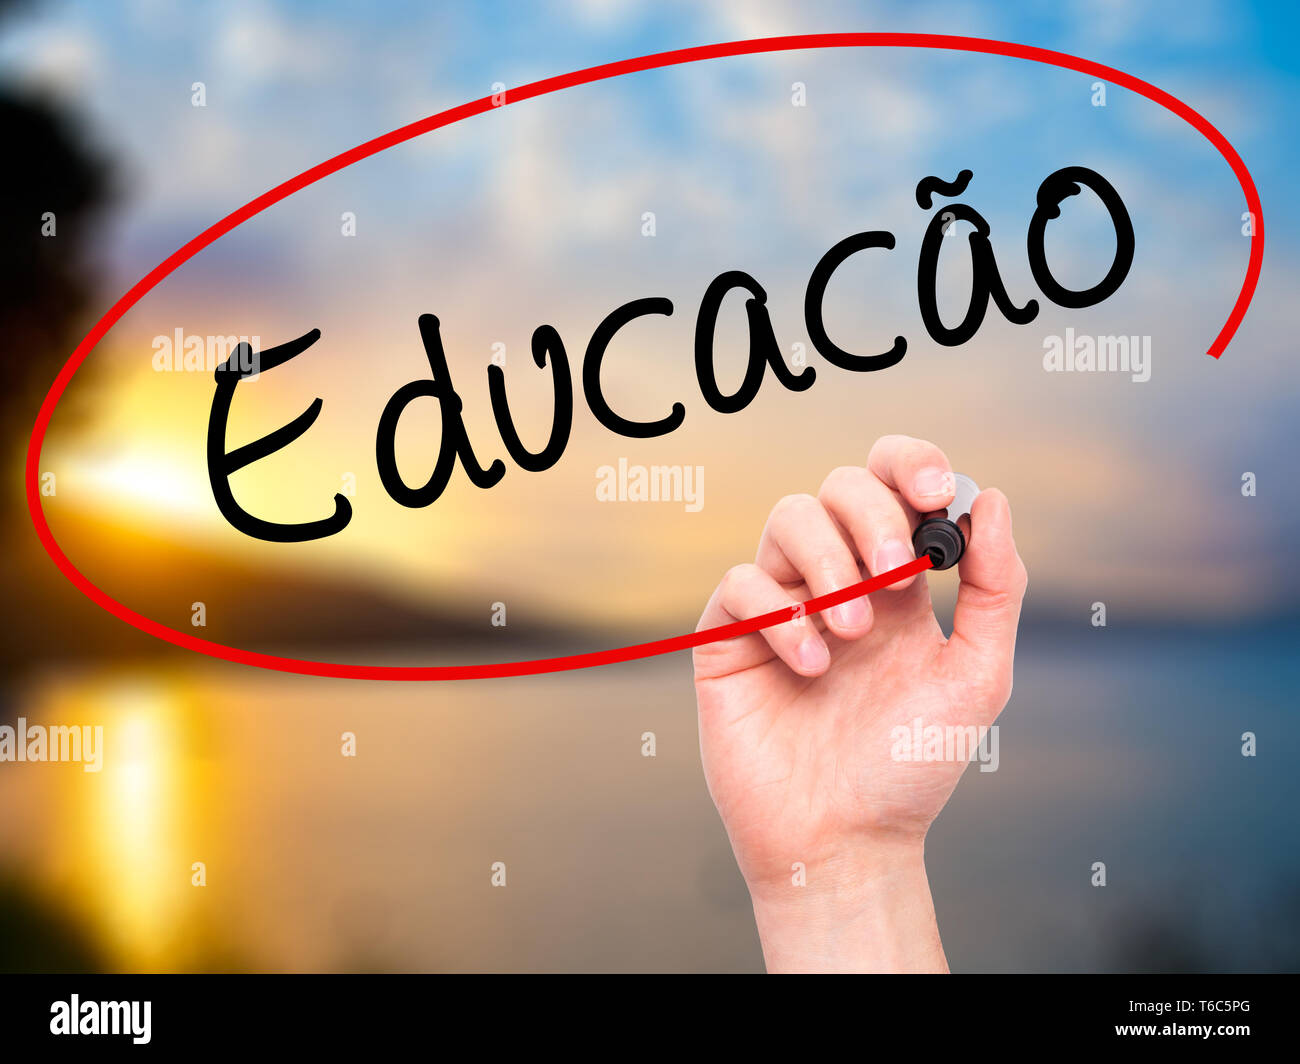 Man Hand writing Education (Educacao in Portuguese) with black marker on visual screen Stock Photo